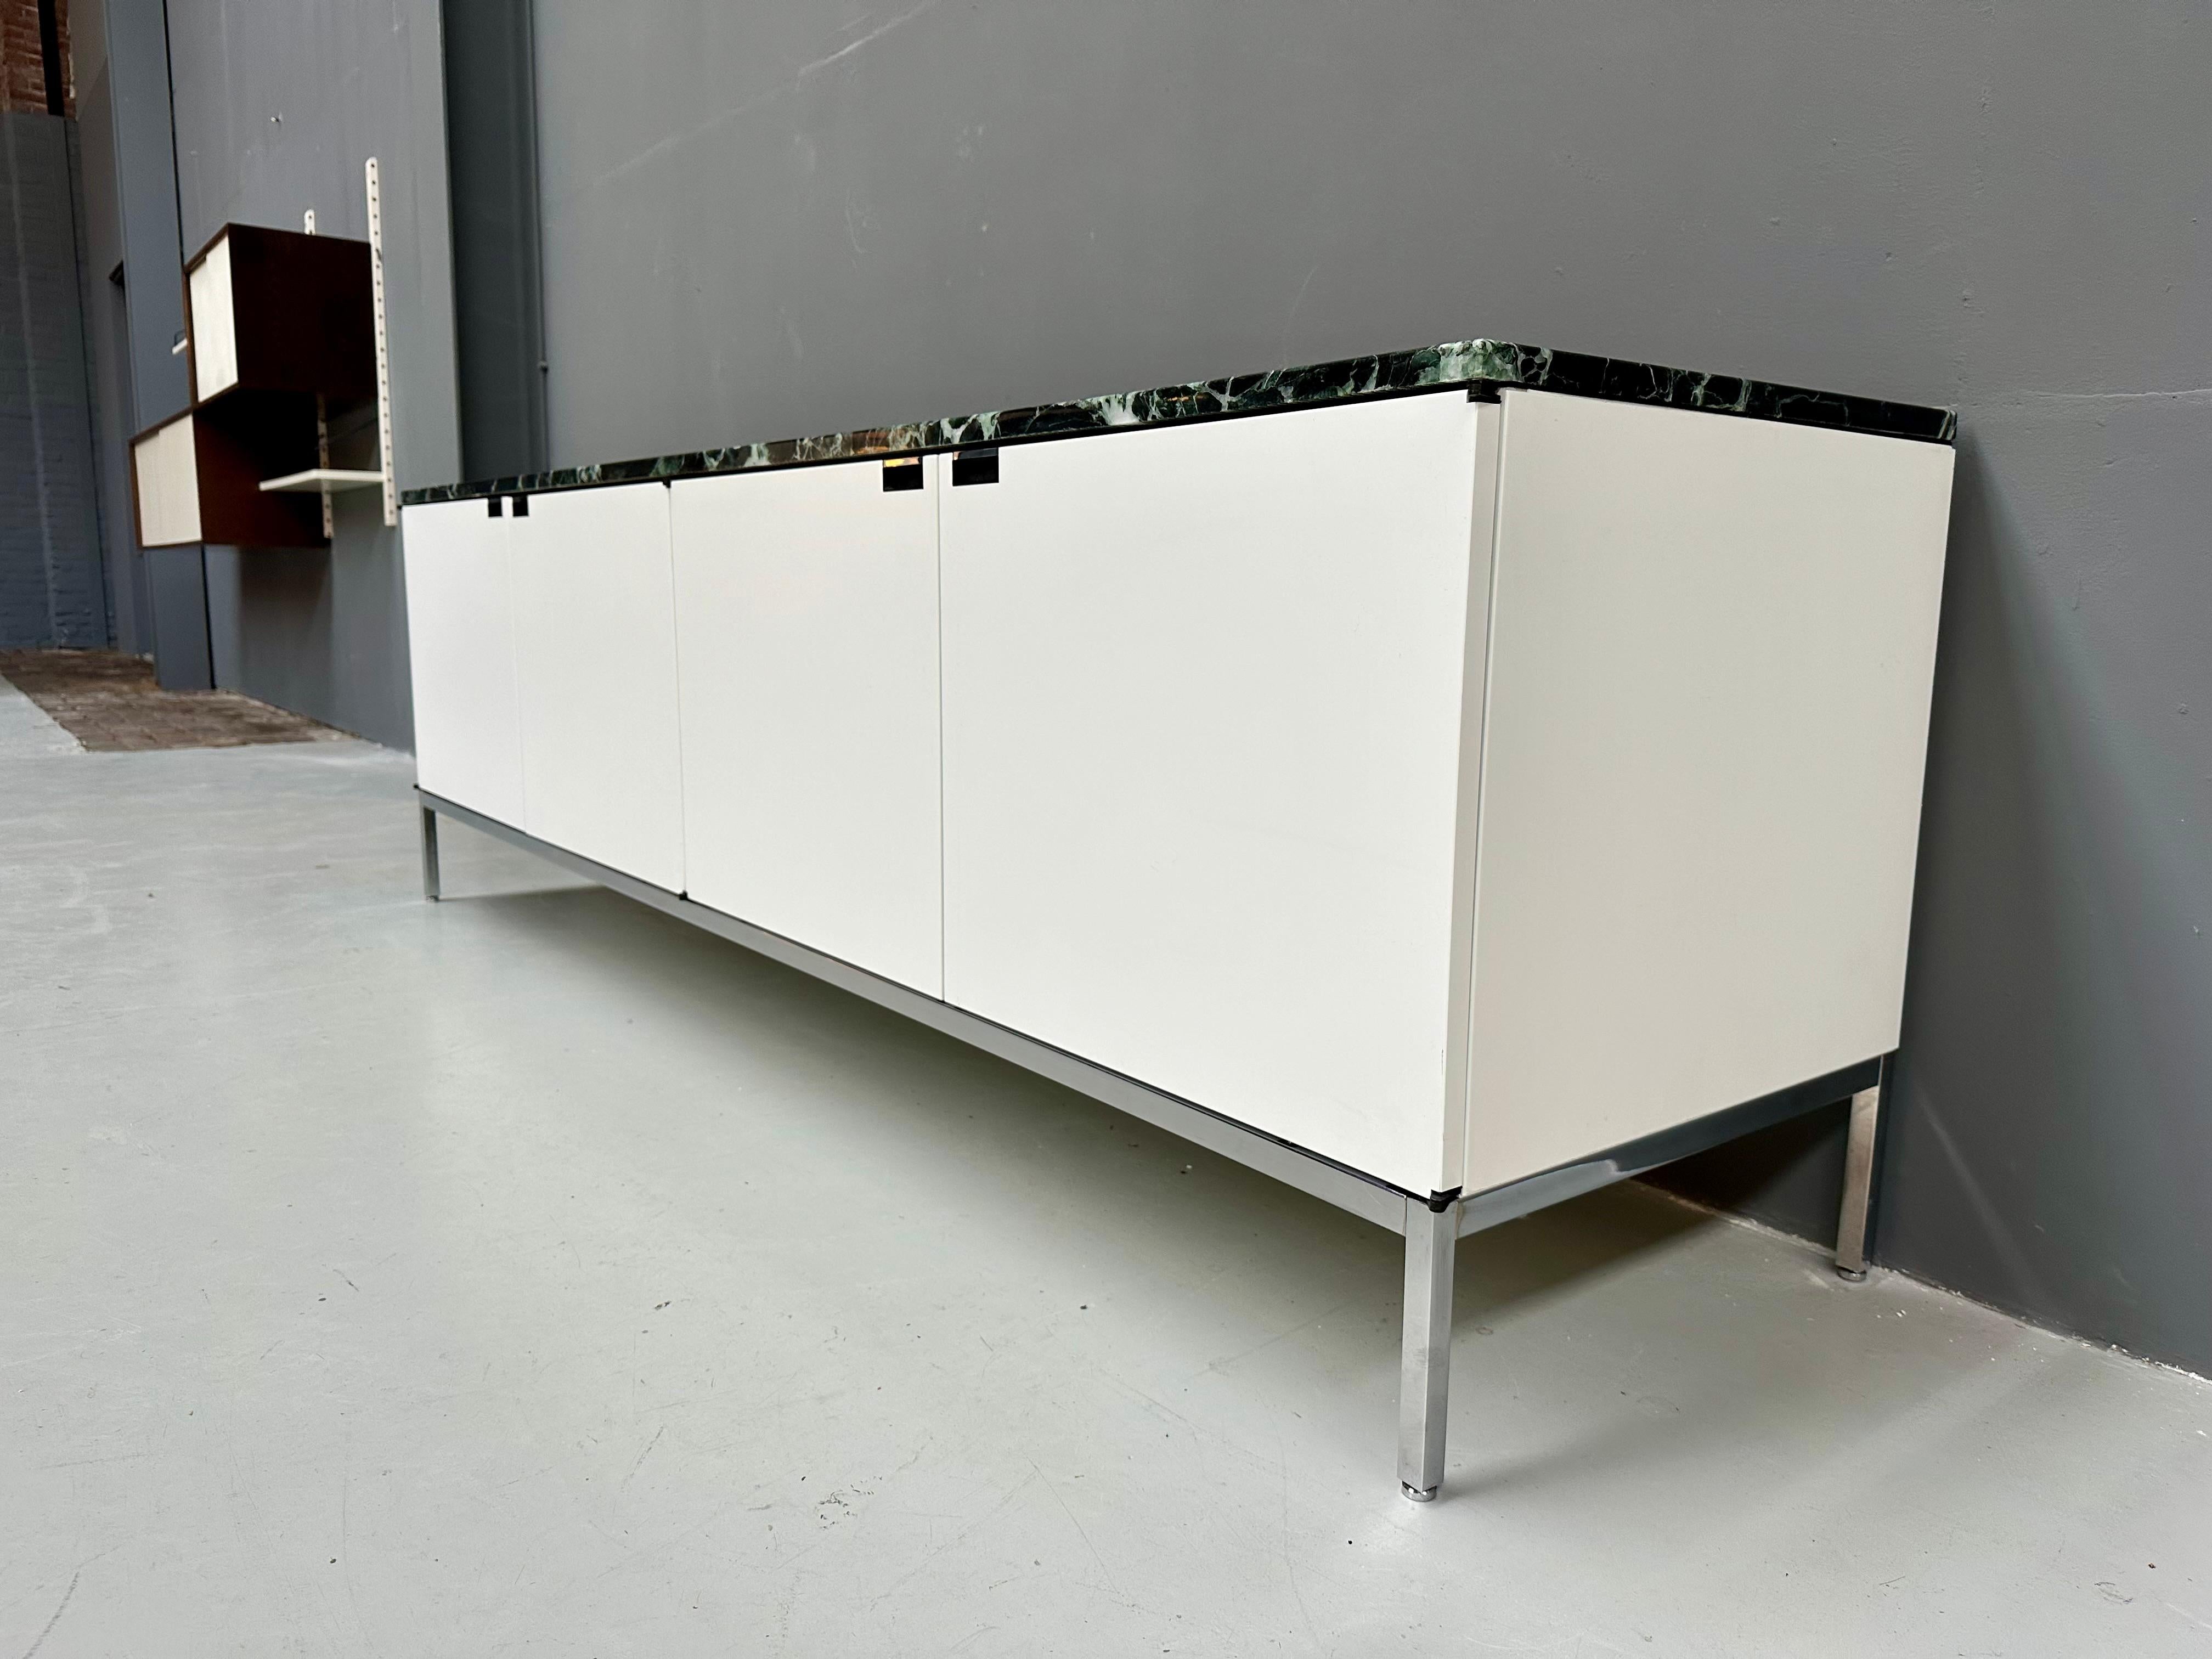 Florence Knoll Credenza New Edition with Alpi Verdi Marble Top, 2010s For Sale 2